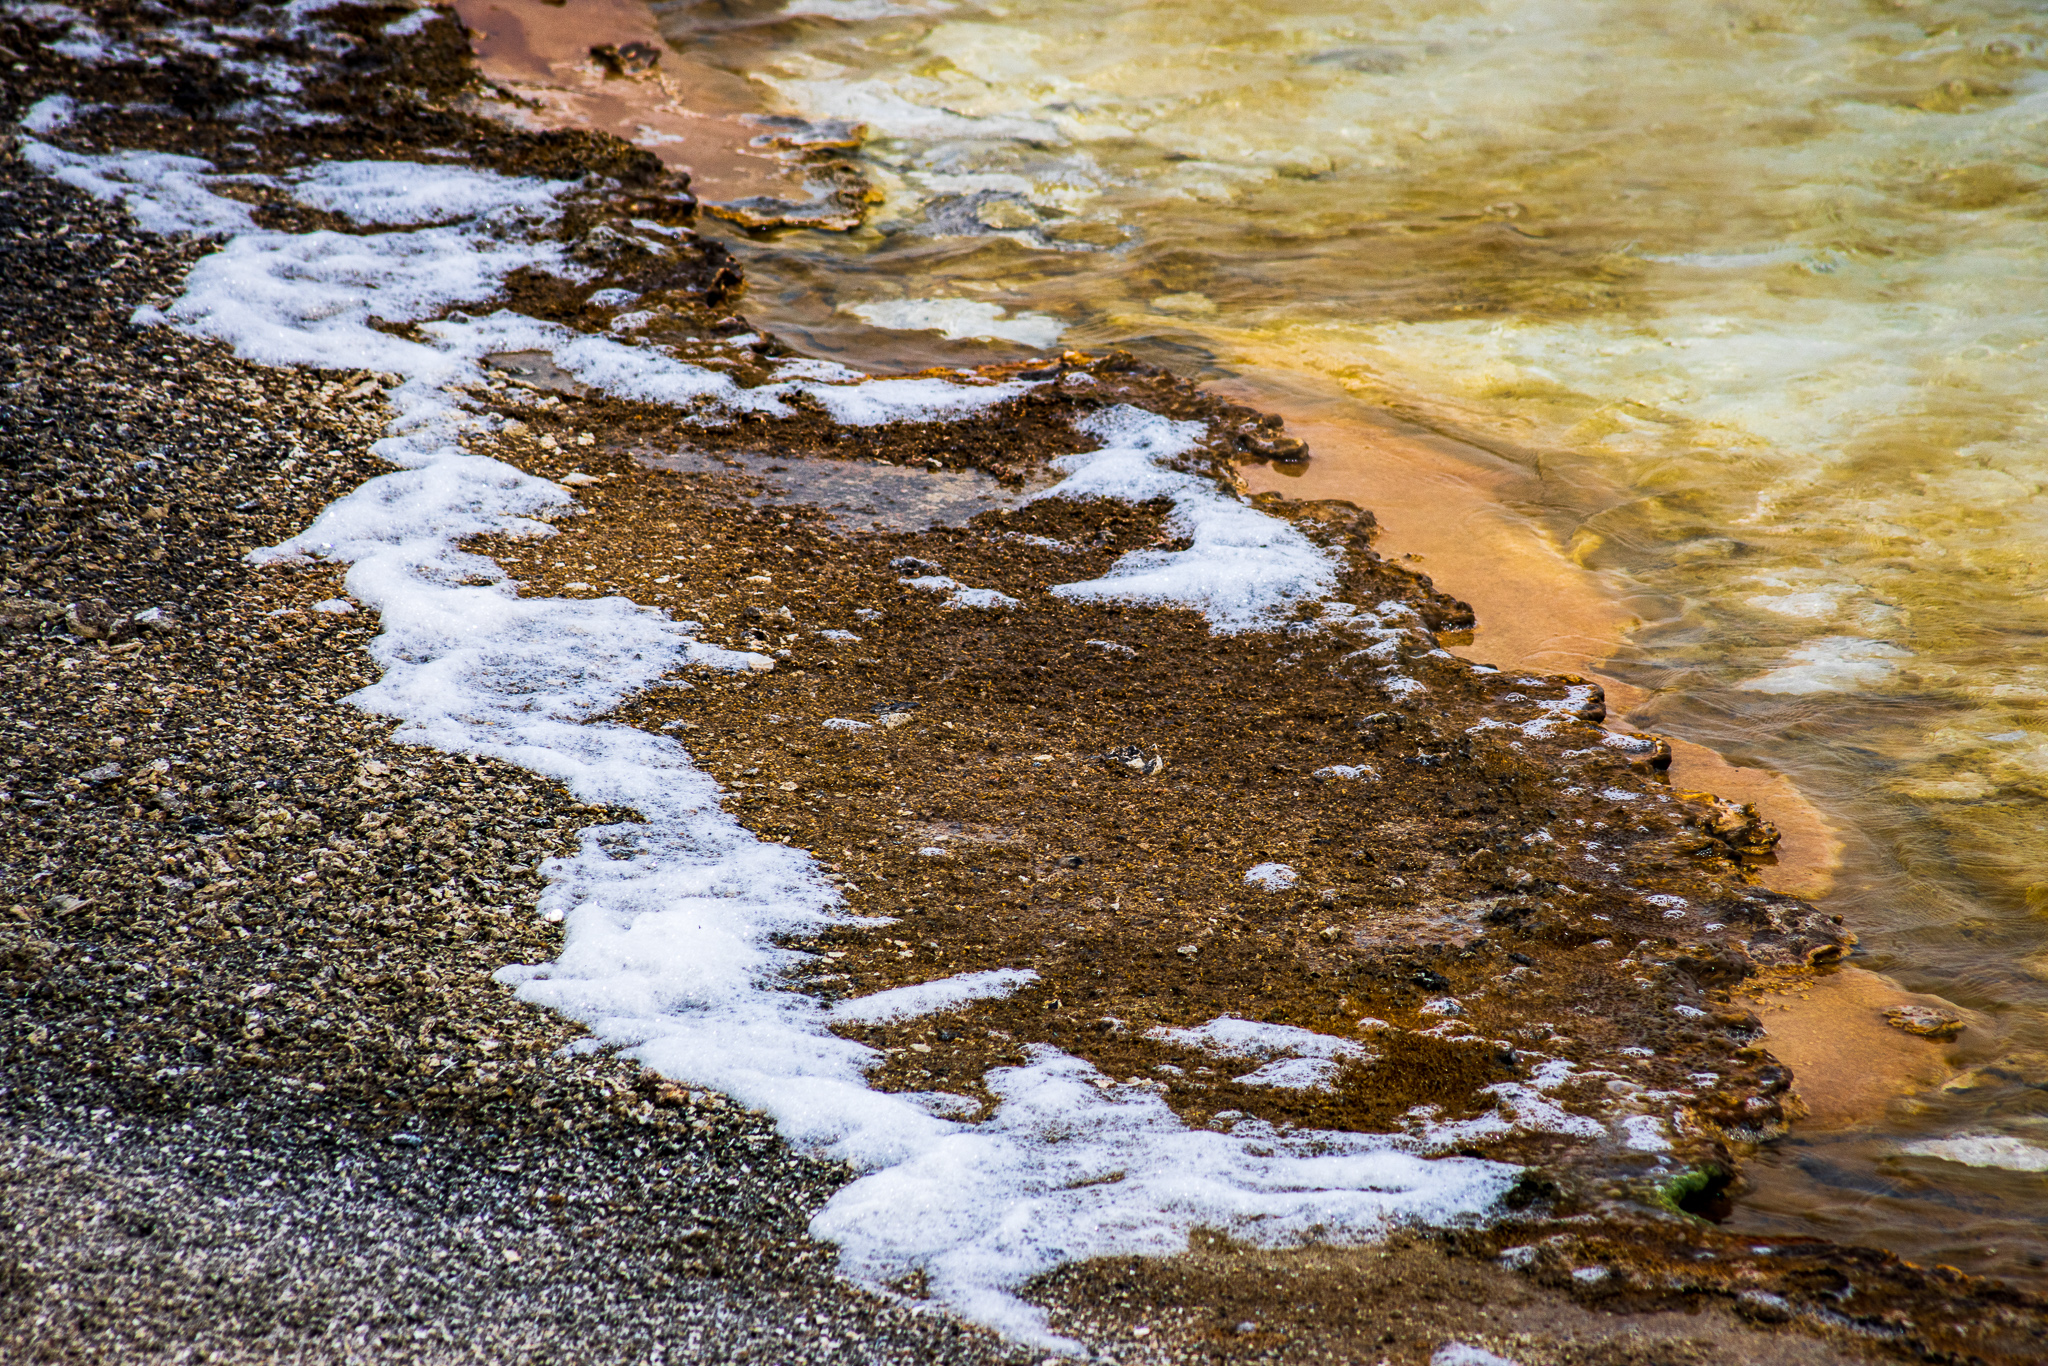 Sulfur Oxidized Hot Spring with Travertine Edges at Yellowstone National Park